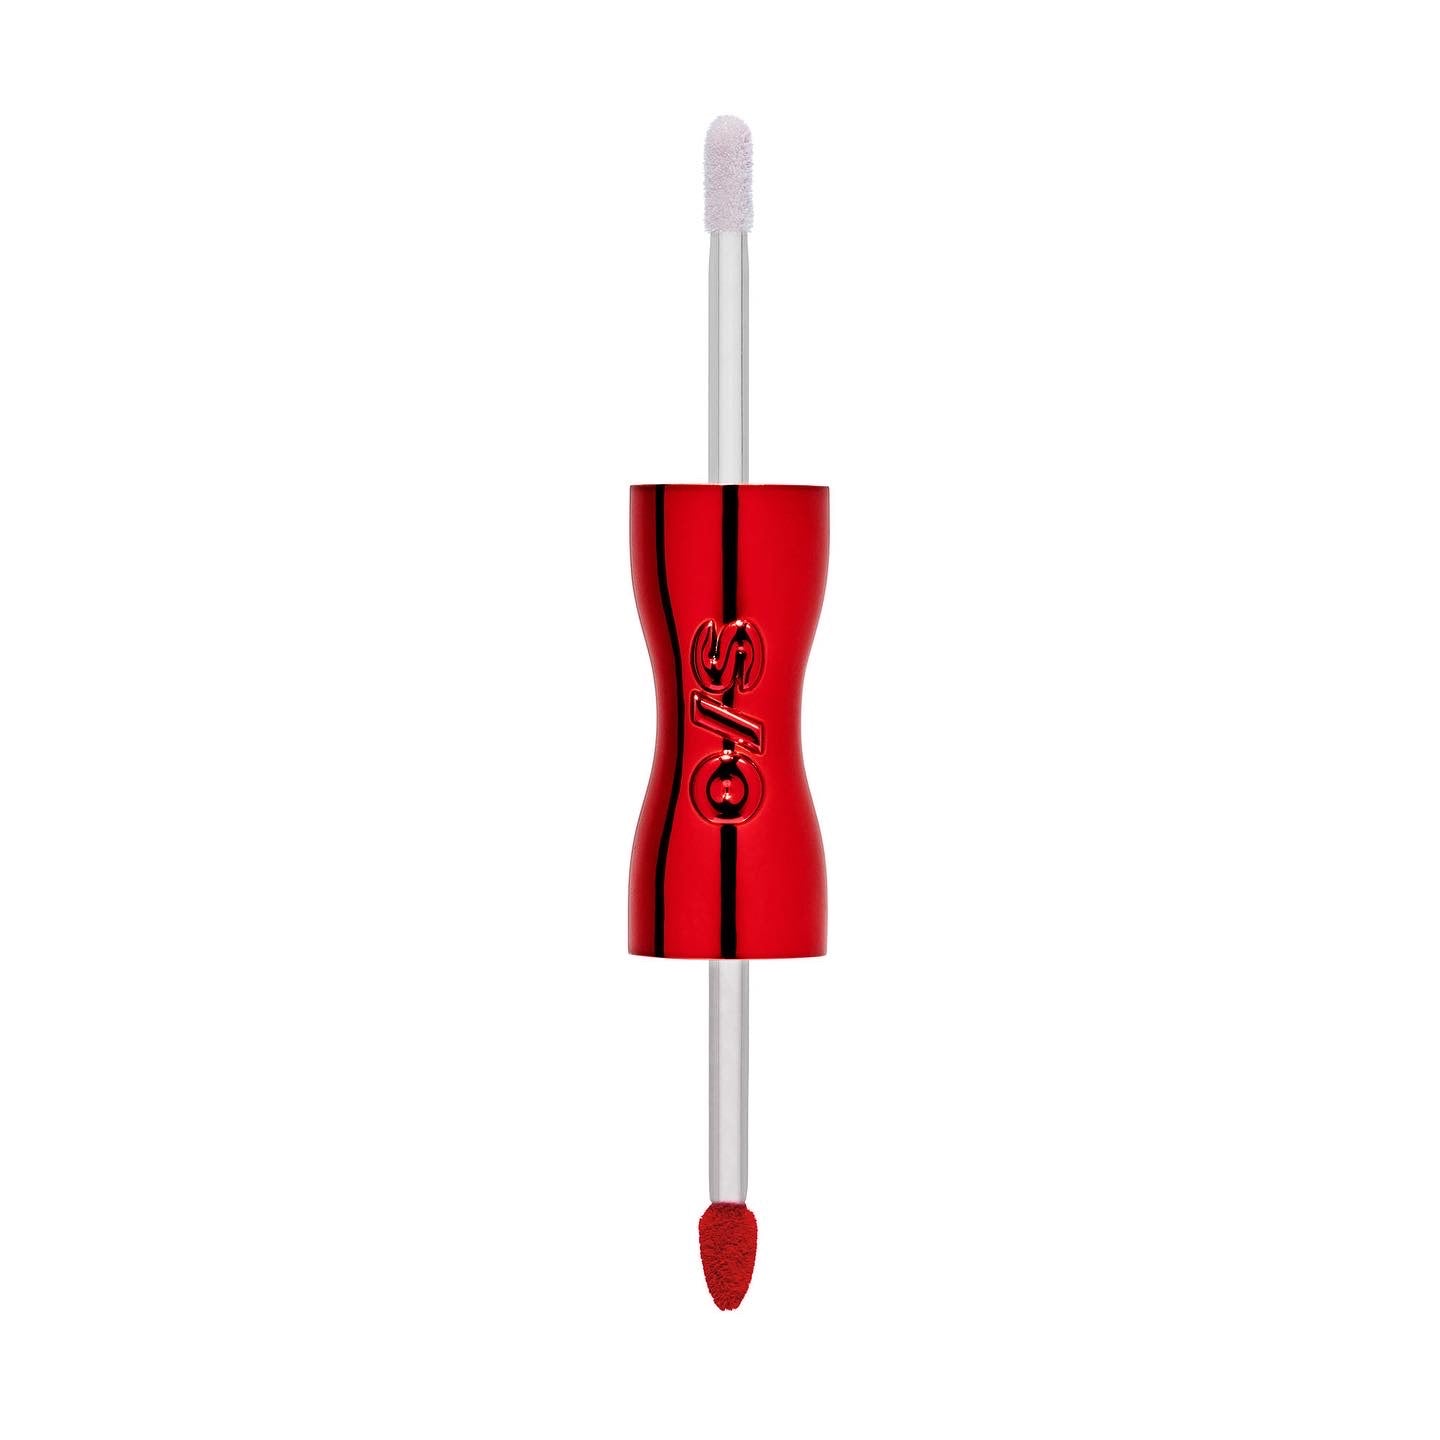 ONE/SIZE BY PATRICK STARRR, DISNEY FANTASIA AND ONE/SIZE DUAL ENDED LIP SNATCHER